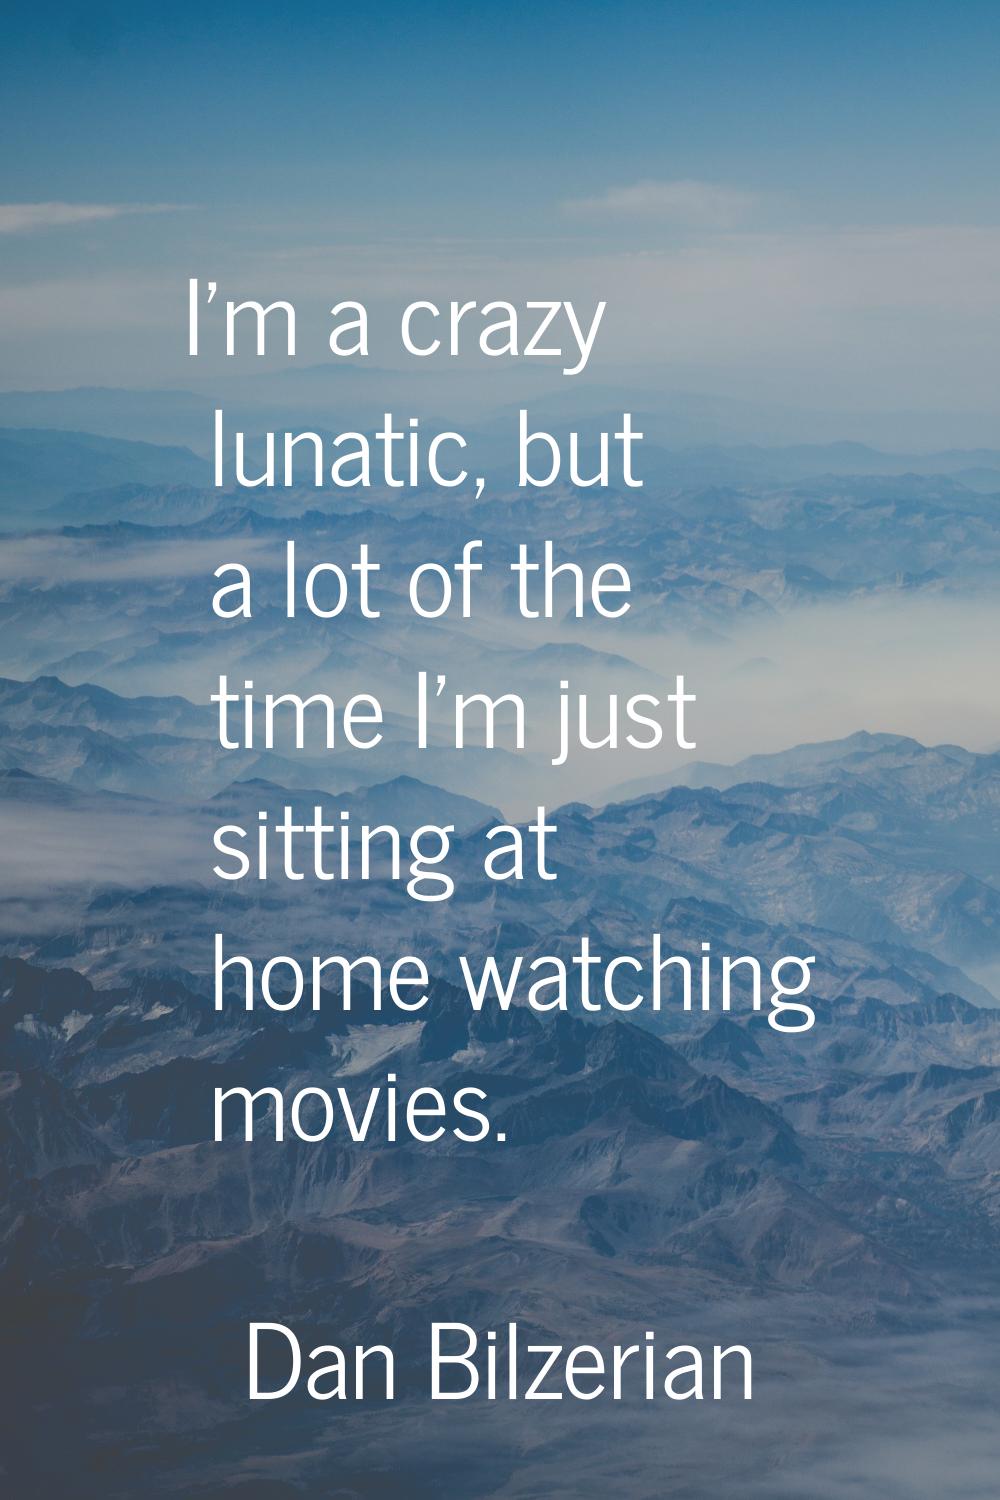 I'm a crazy lunatic, but a lot of the time I'm just sitting at home watching movies.